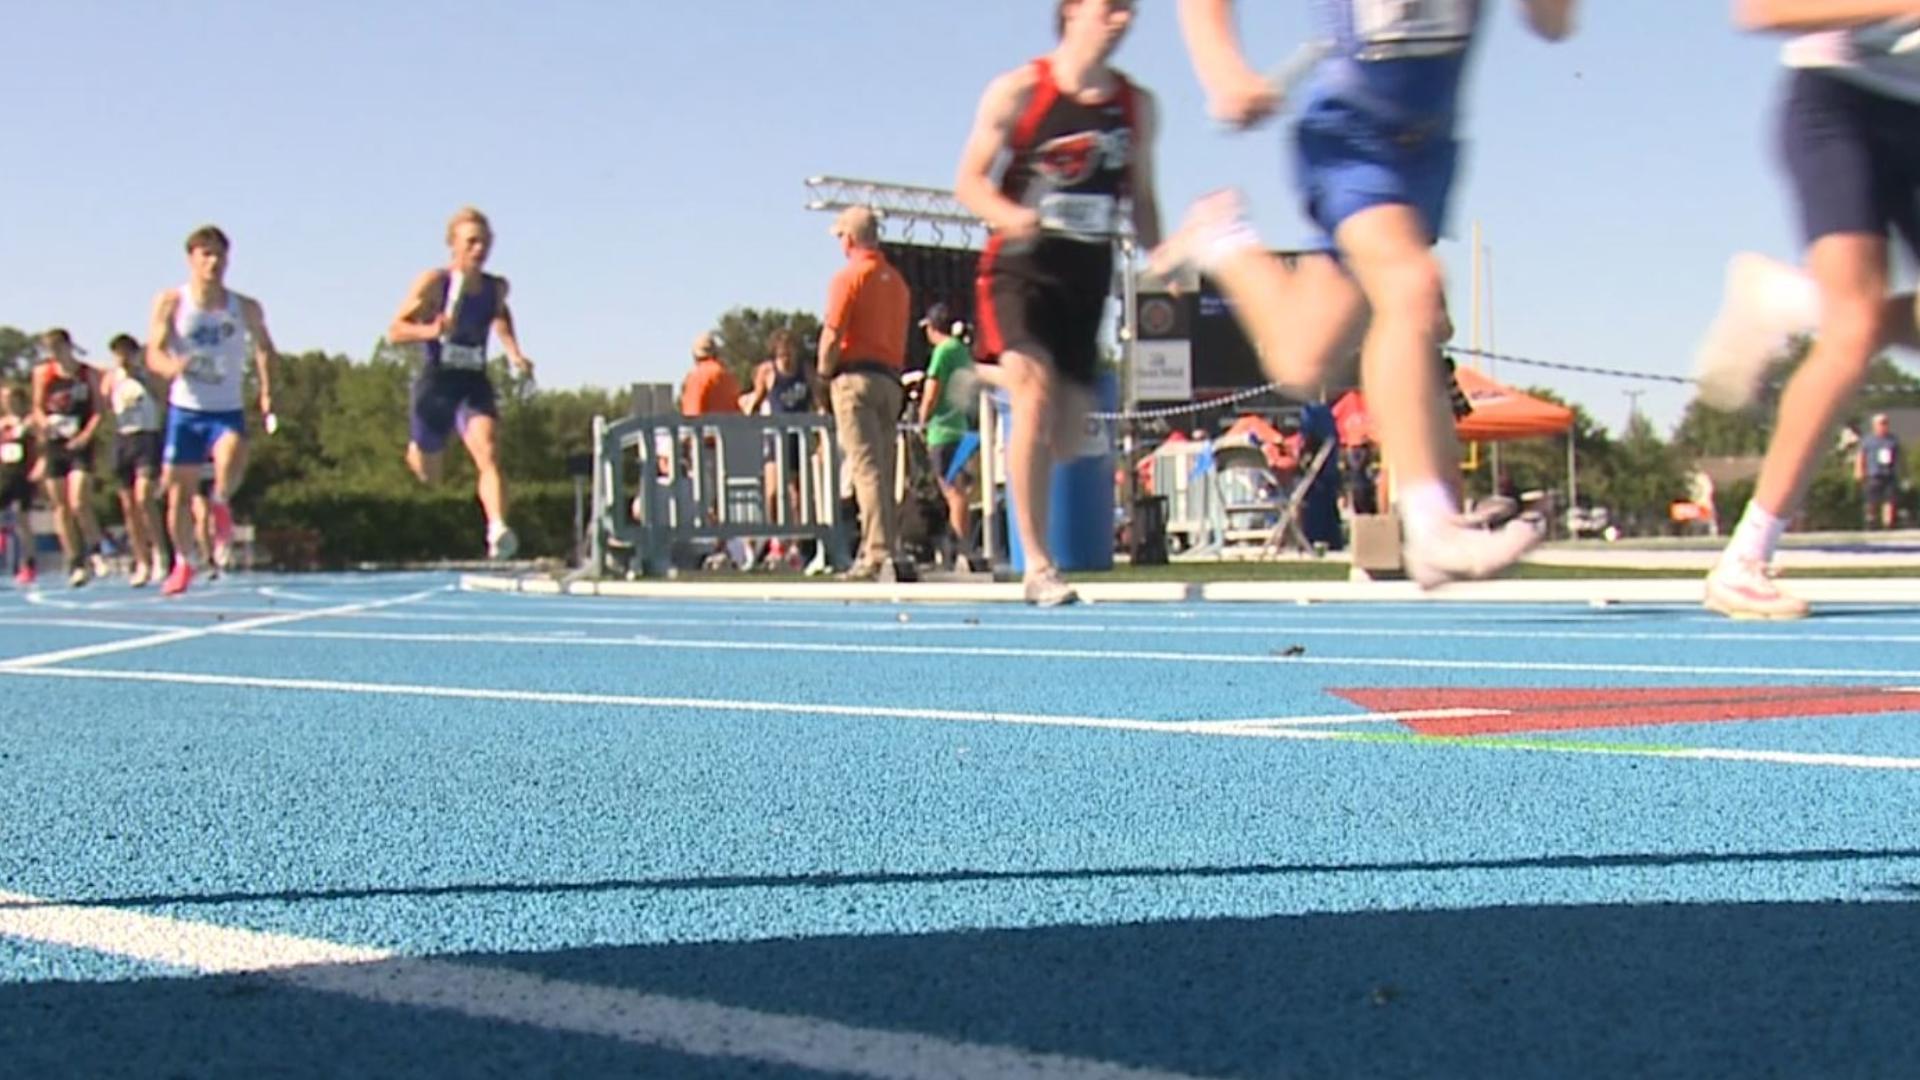 Last week it was the girls running down track state championships. Here are the highlights from the boys this past weekend.